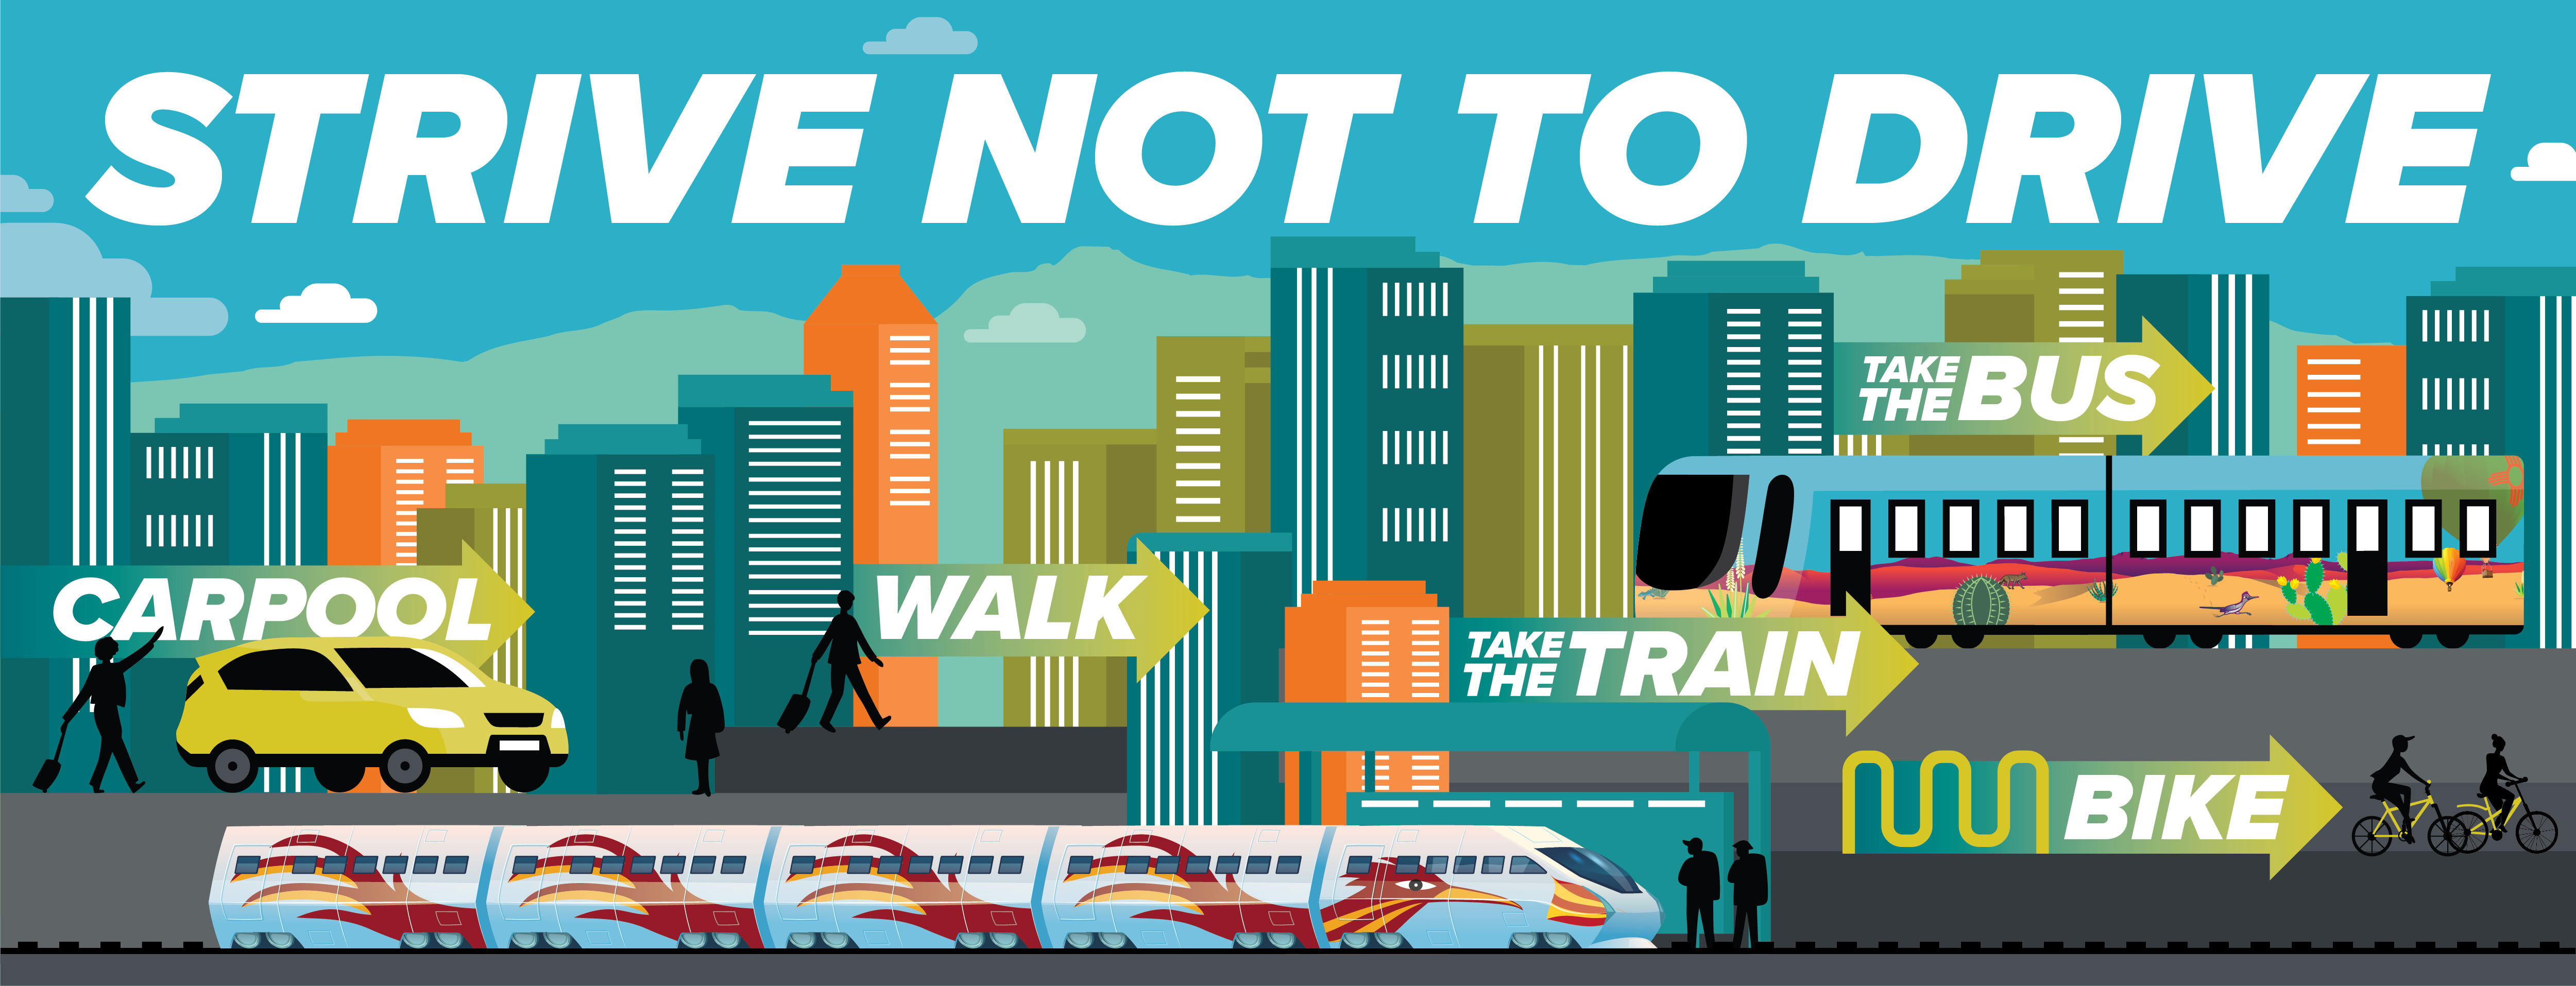 The Strive Not to Drive page main banner image, featuring illustrations of people and multiple modes of transpiration like the bus and the train.